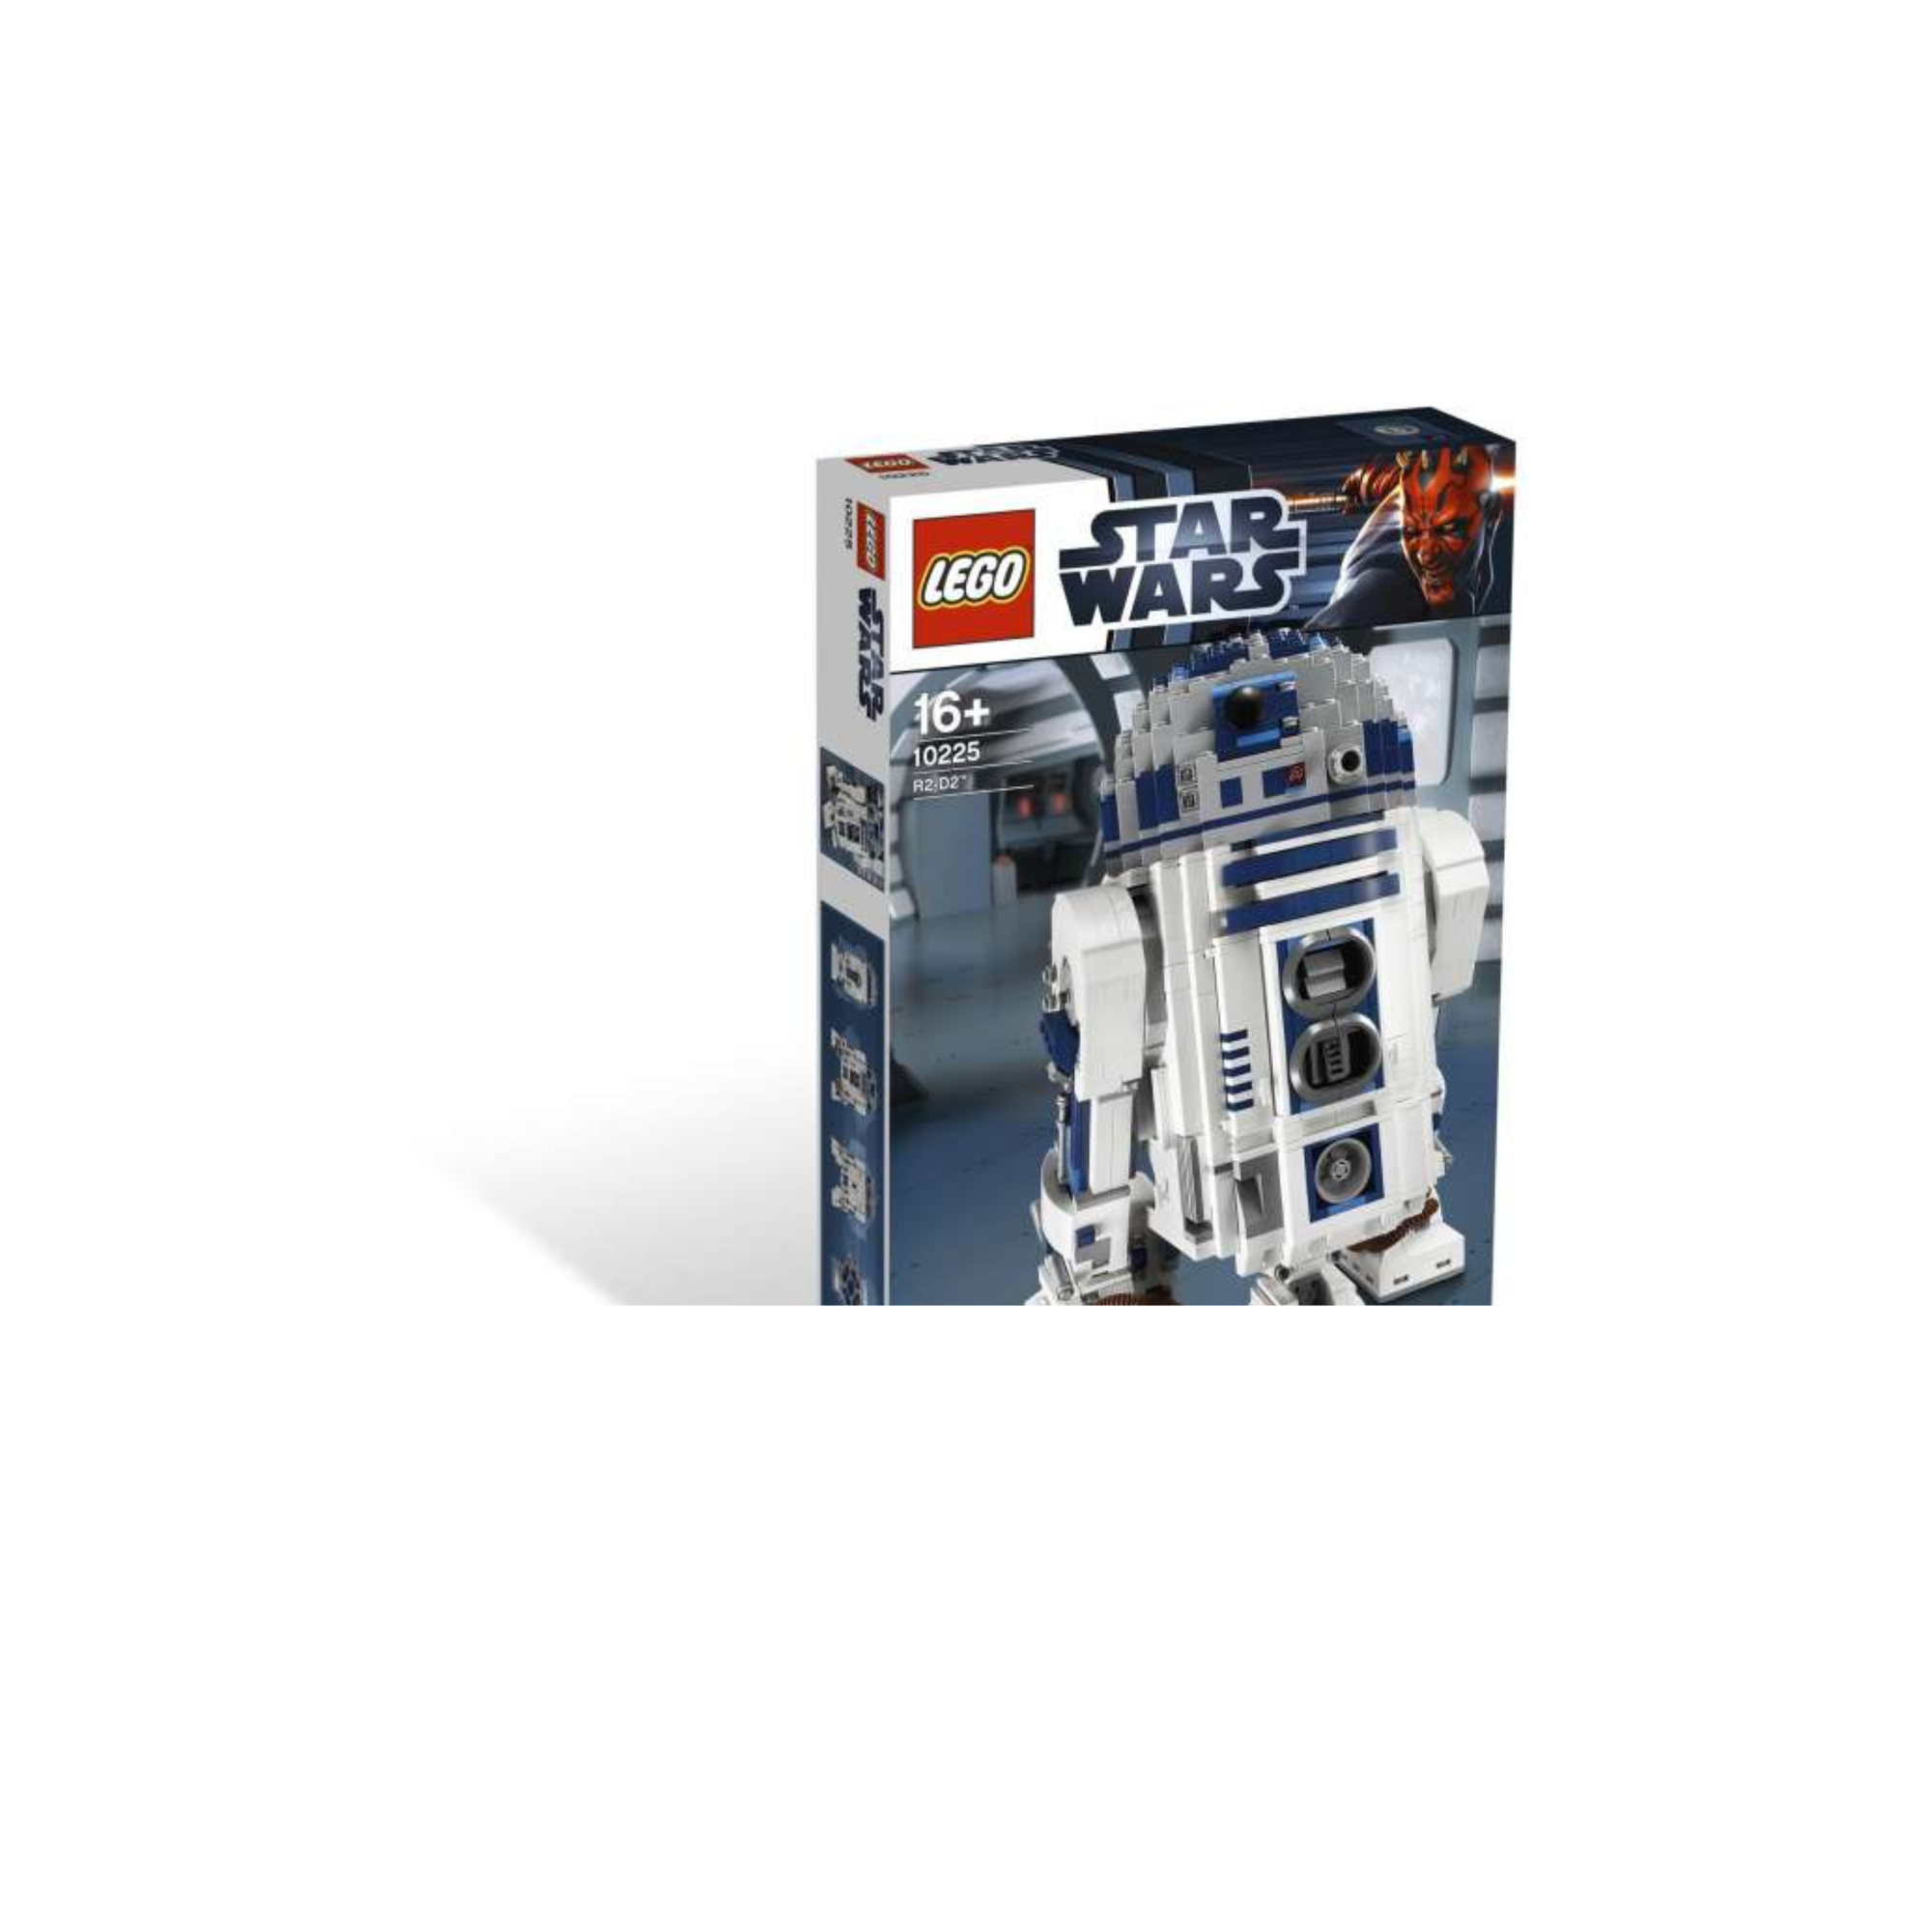 Star Wars Lego Ultimate Collector Series R2-D2